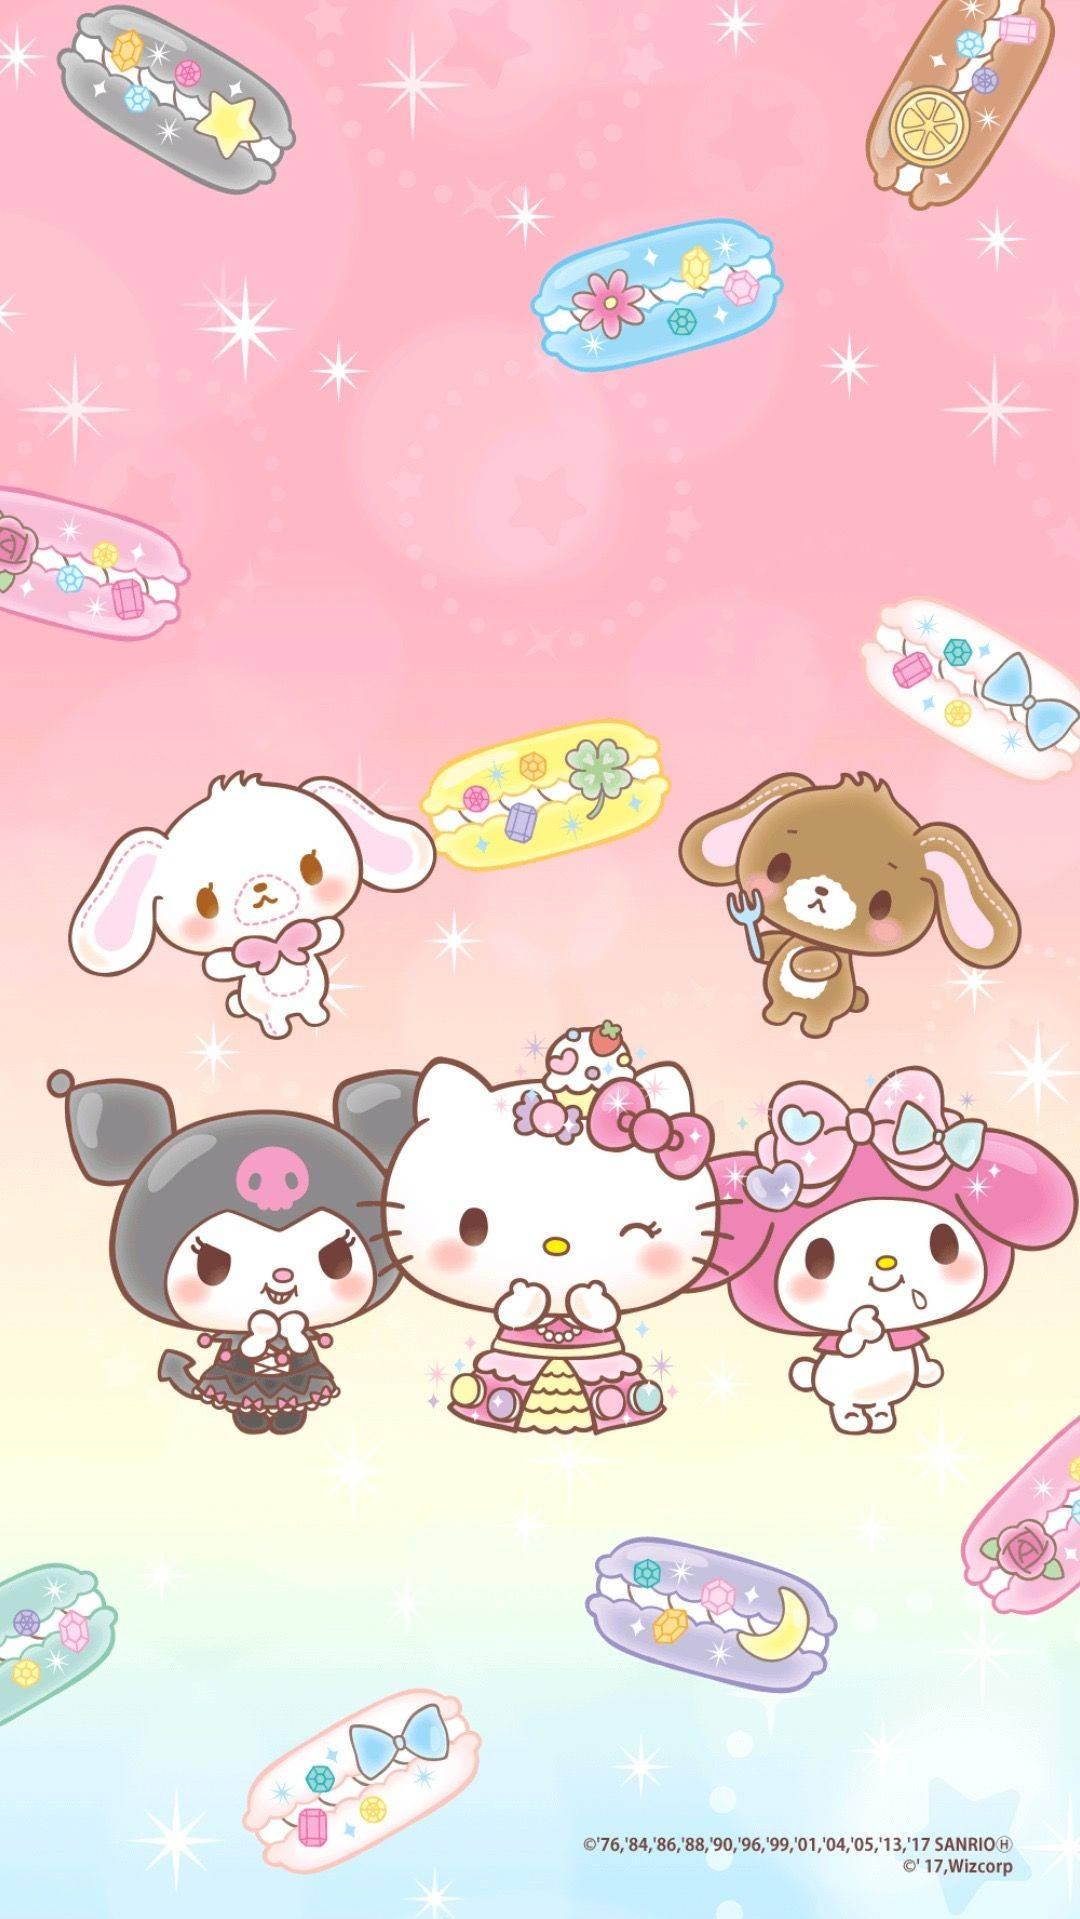  on Twitter I like Sanrio So mine Is this adorable animated Cinnamoroll  Wallpaper and theme through my phone  my Home Screen is Aizawa  httpstco239ZaWTqQG  Twitter